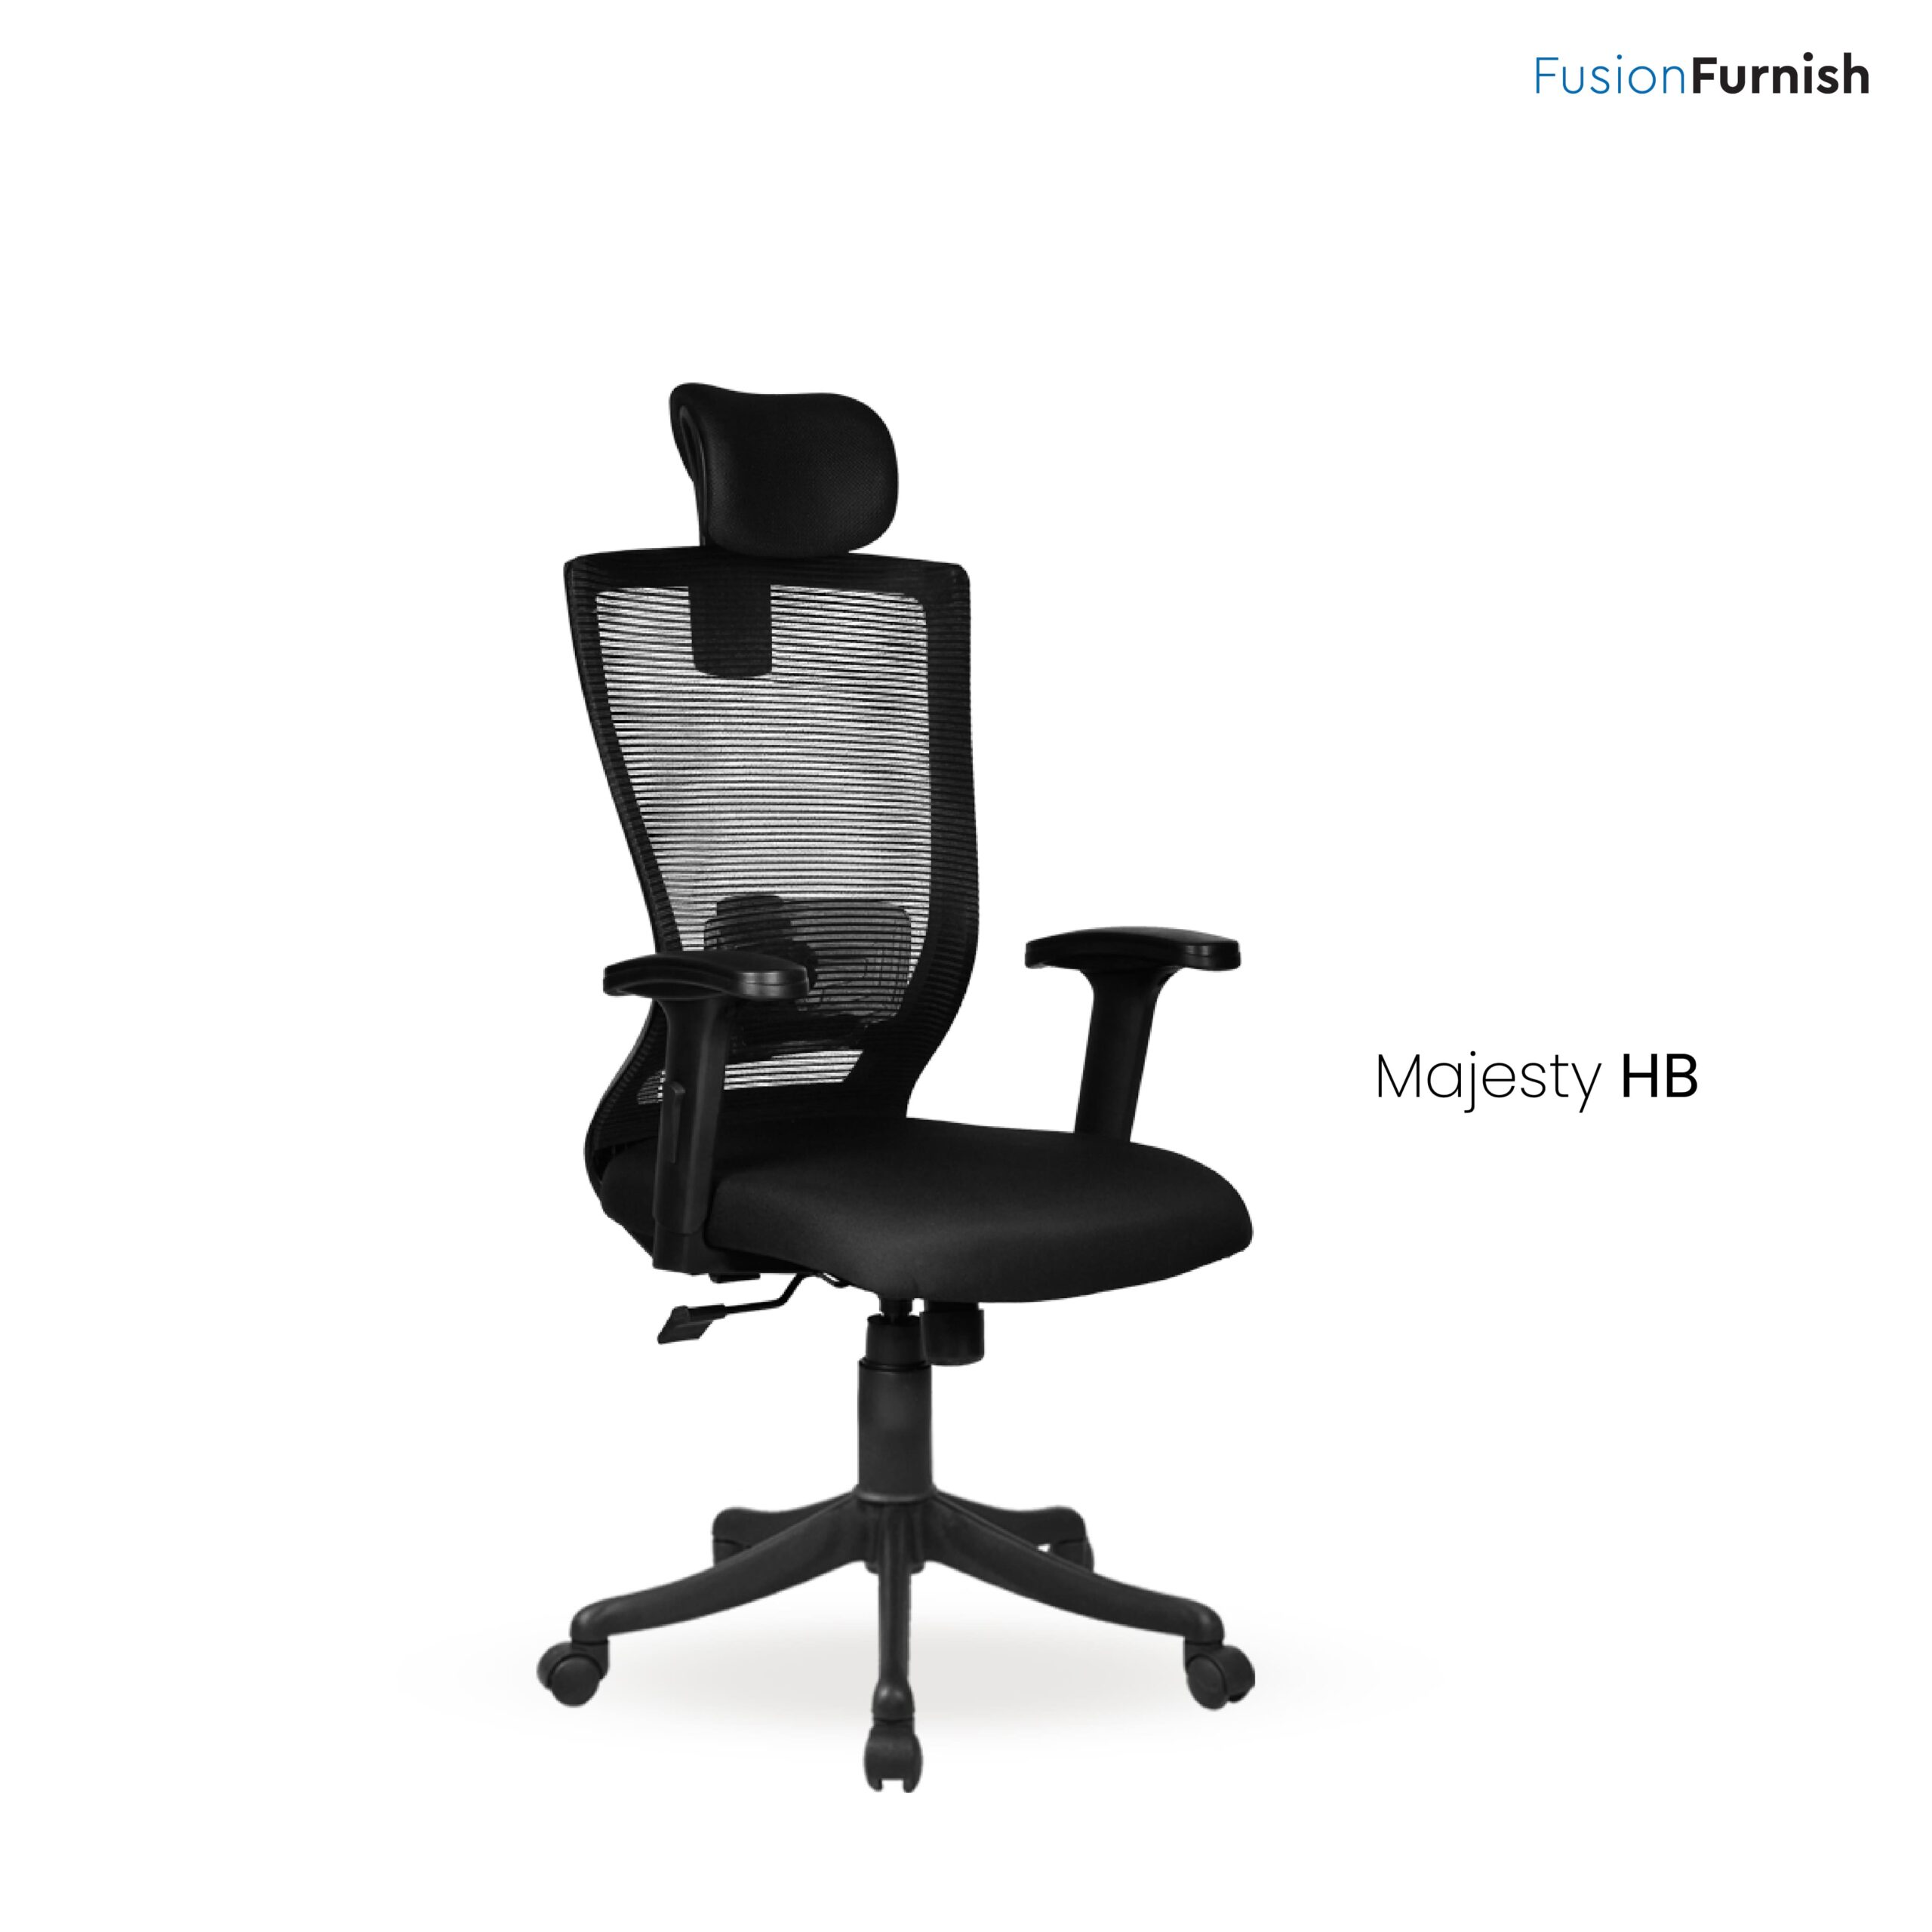 MAJESTY HB ZXA suitable office chair improves your posture, supports good health and is known to enhance productivity. The royal looking Majesty series is the best choice for your dedicated workspace at the office or home.